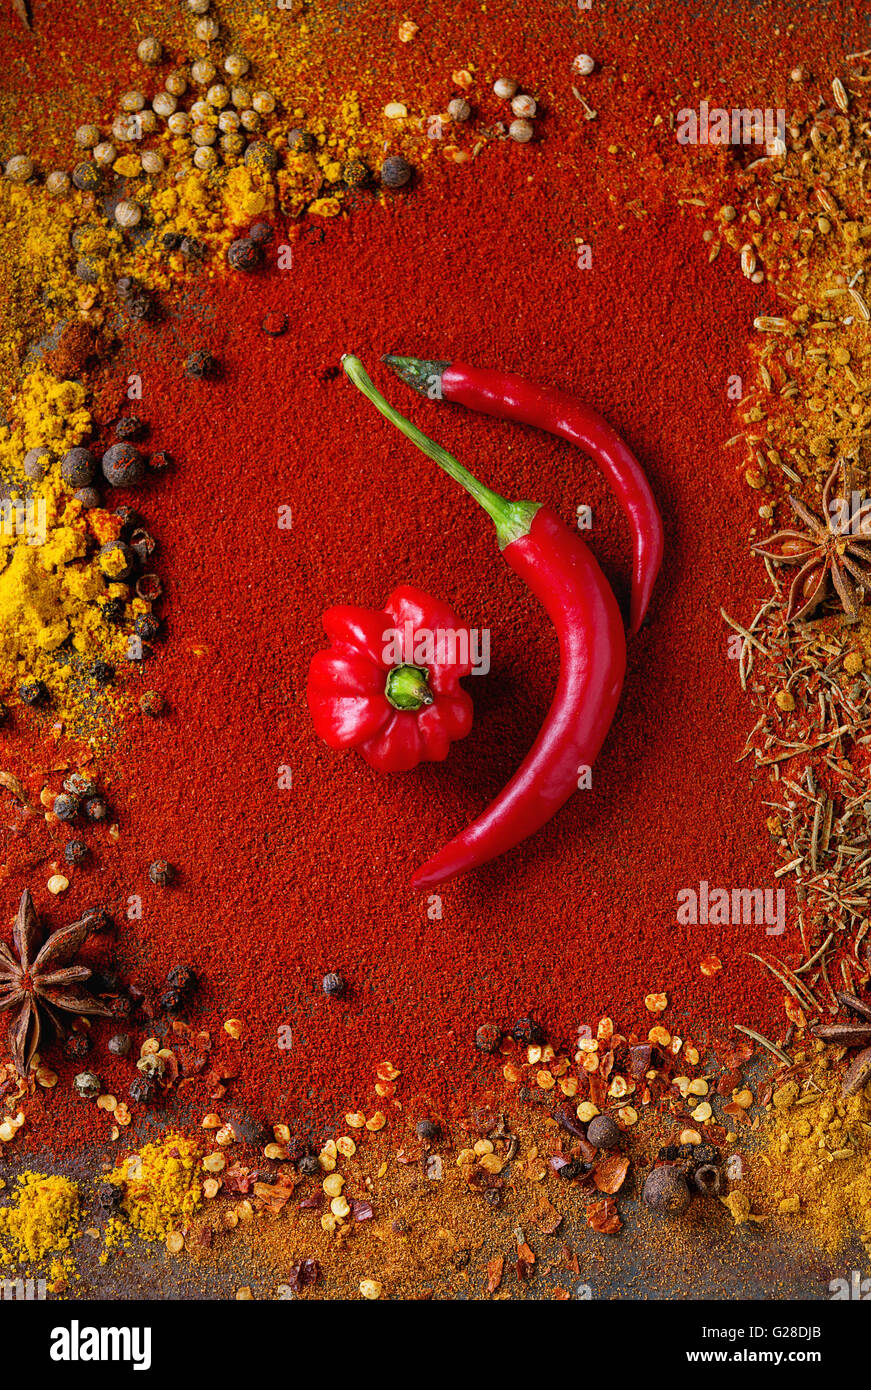 Spicy background with chili peppers Stock Photo